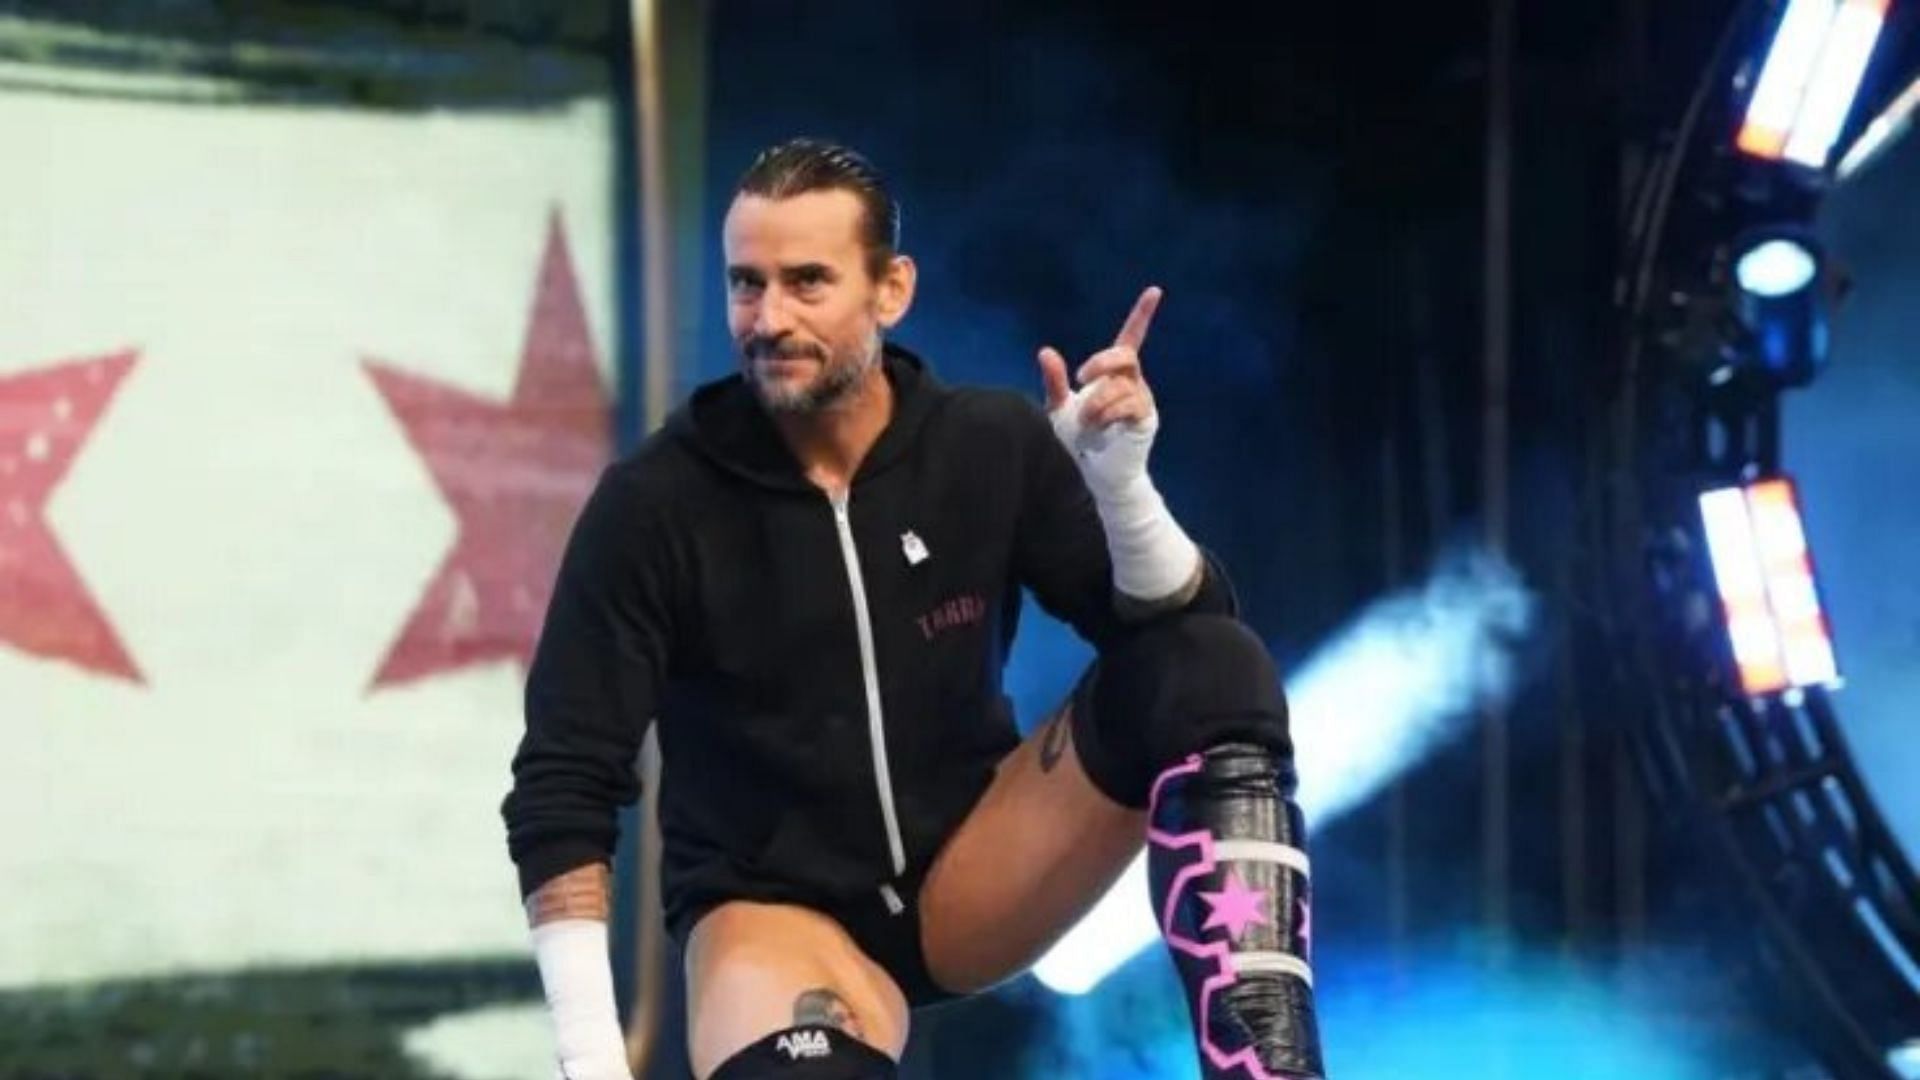 CM Punk is set to return to AEW this week.